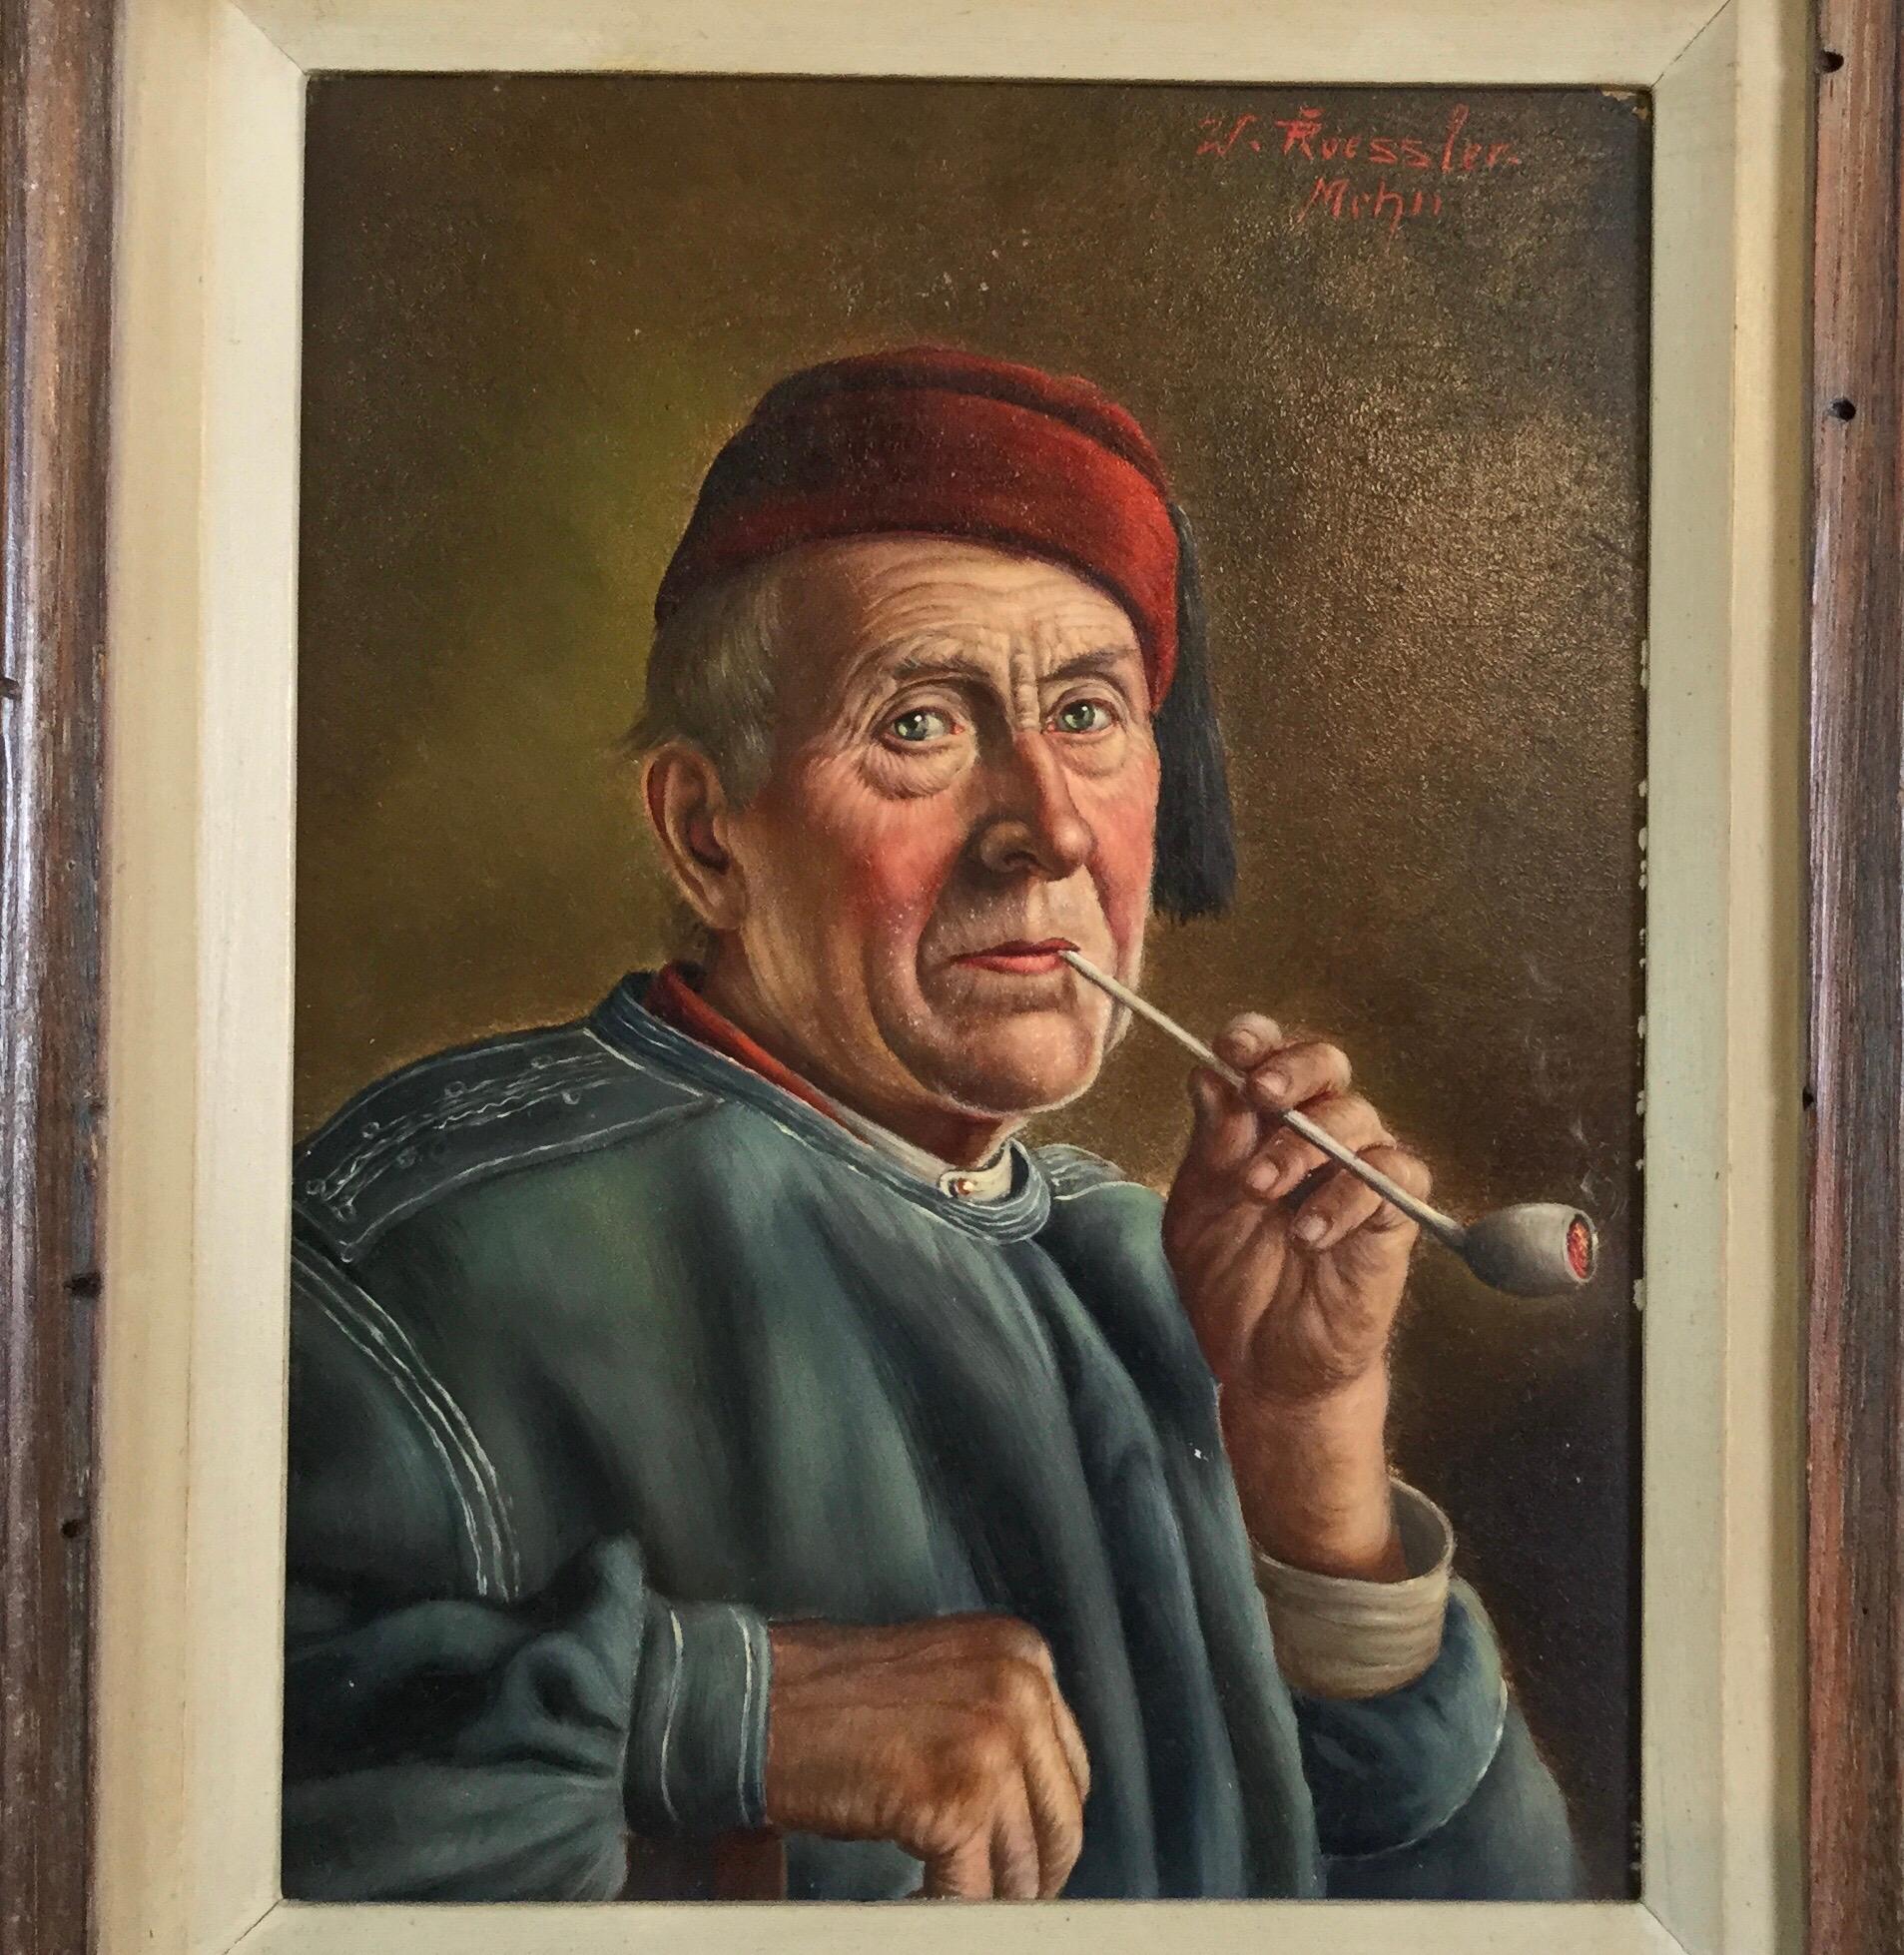 J. Rossler portrait of a gentleman with pipe oil painting on board. Signed upper right corner. Overall size: 14